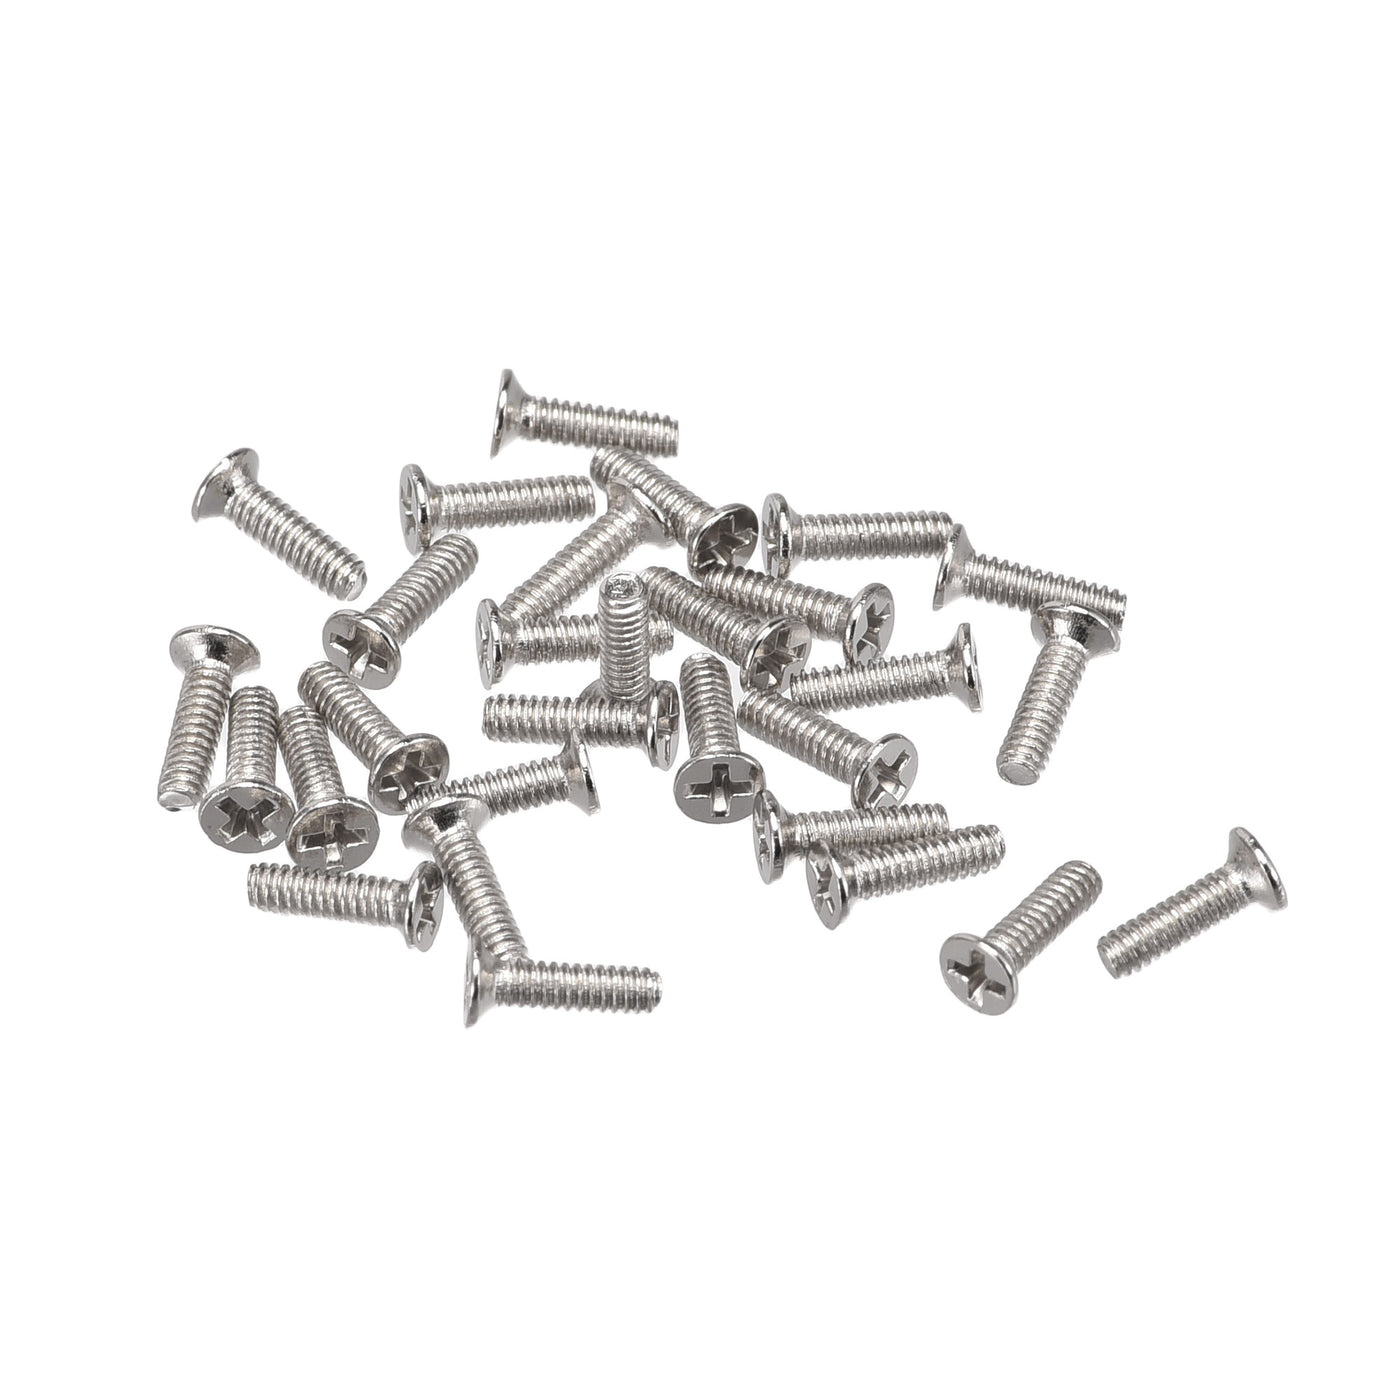 uxcell Uxcell M1.4 x 5mm Tiny Screws Phillips Flat Head Screws Carbon Steel Machine Screws for Glasses Spectacles Watch and Other Small Electronics 500pcs